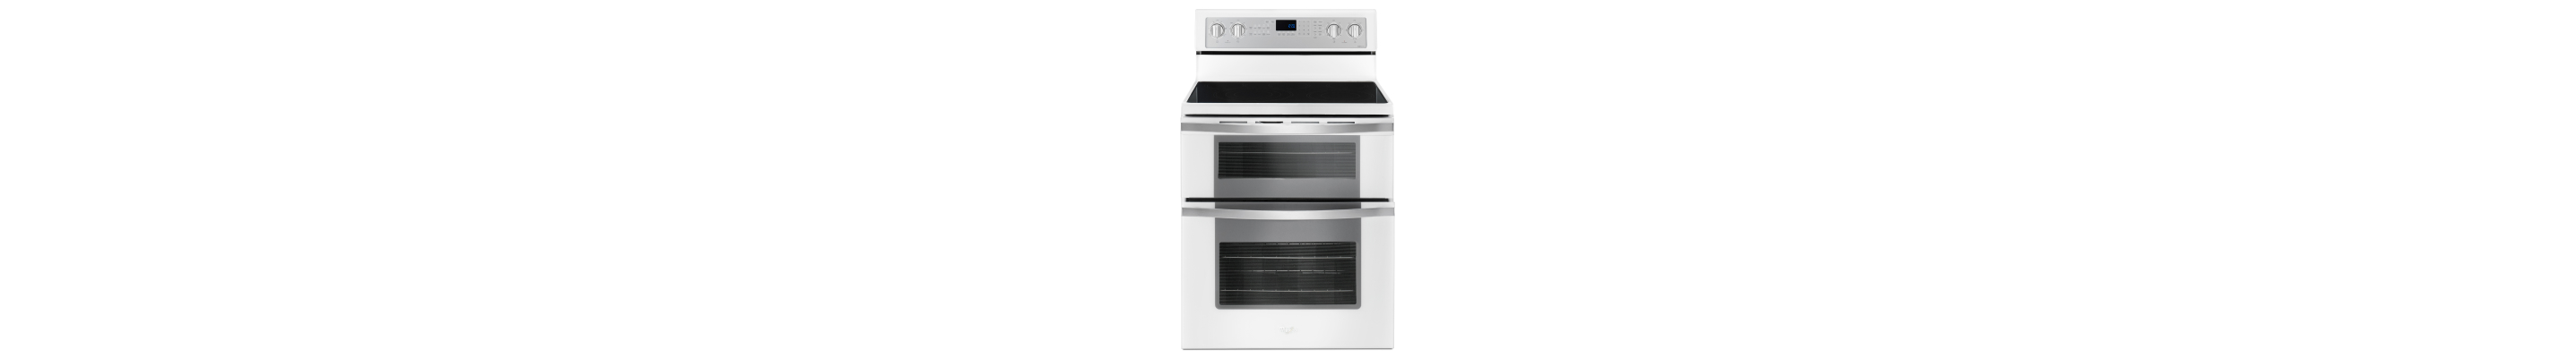 Whirlpool Gold 6.2 cu. ft. Electric Range (WFE720H0AS) review: This  Whirlpool range is a reliable kitchen companion - CNET